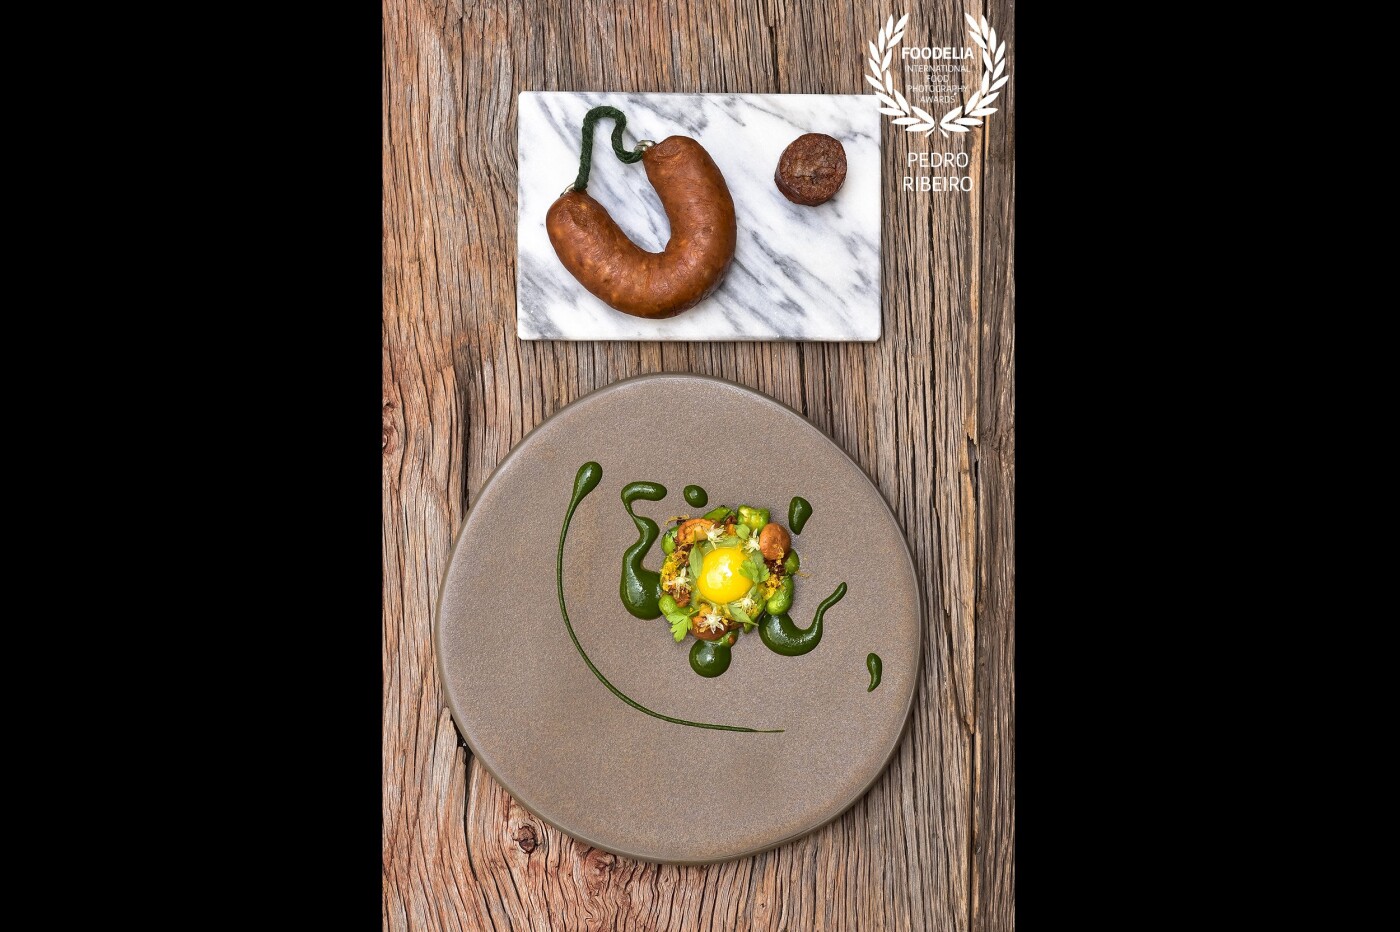 This image was made while visiting the one-star Michelin restaurant Fortaleza do Guincho in Cascais, Portugal.<br />
This menu with sea inspiration was created by Executive chef Gil Fernandes.